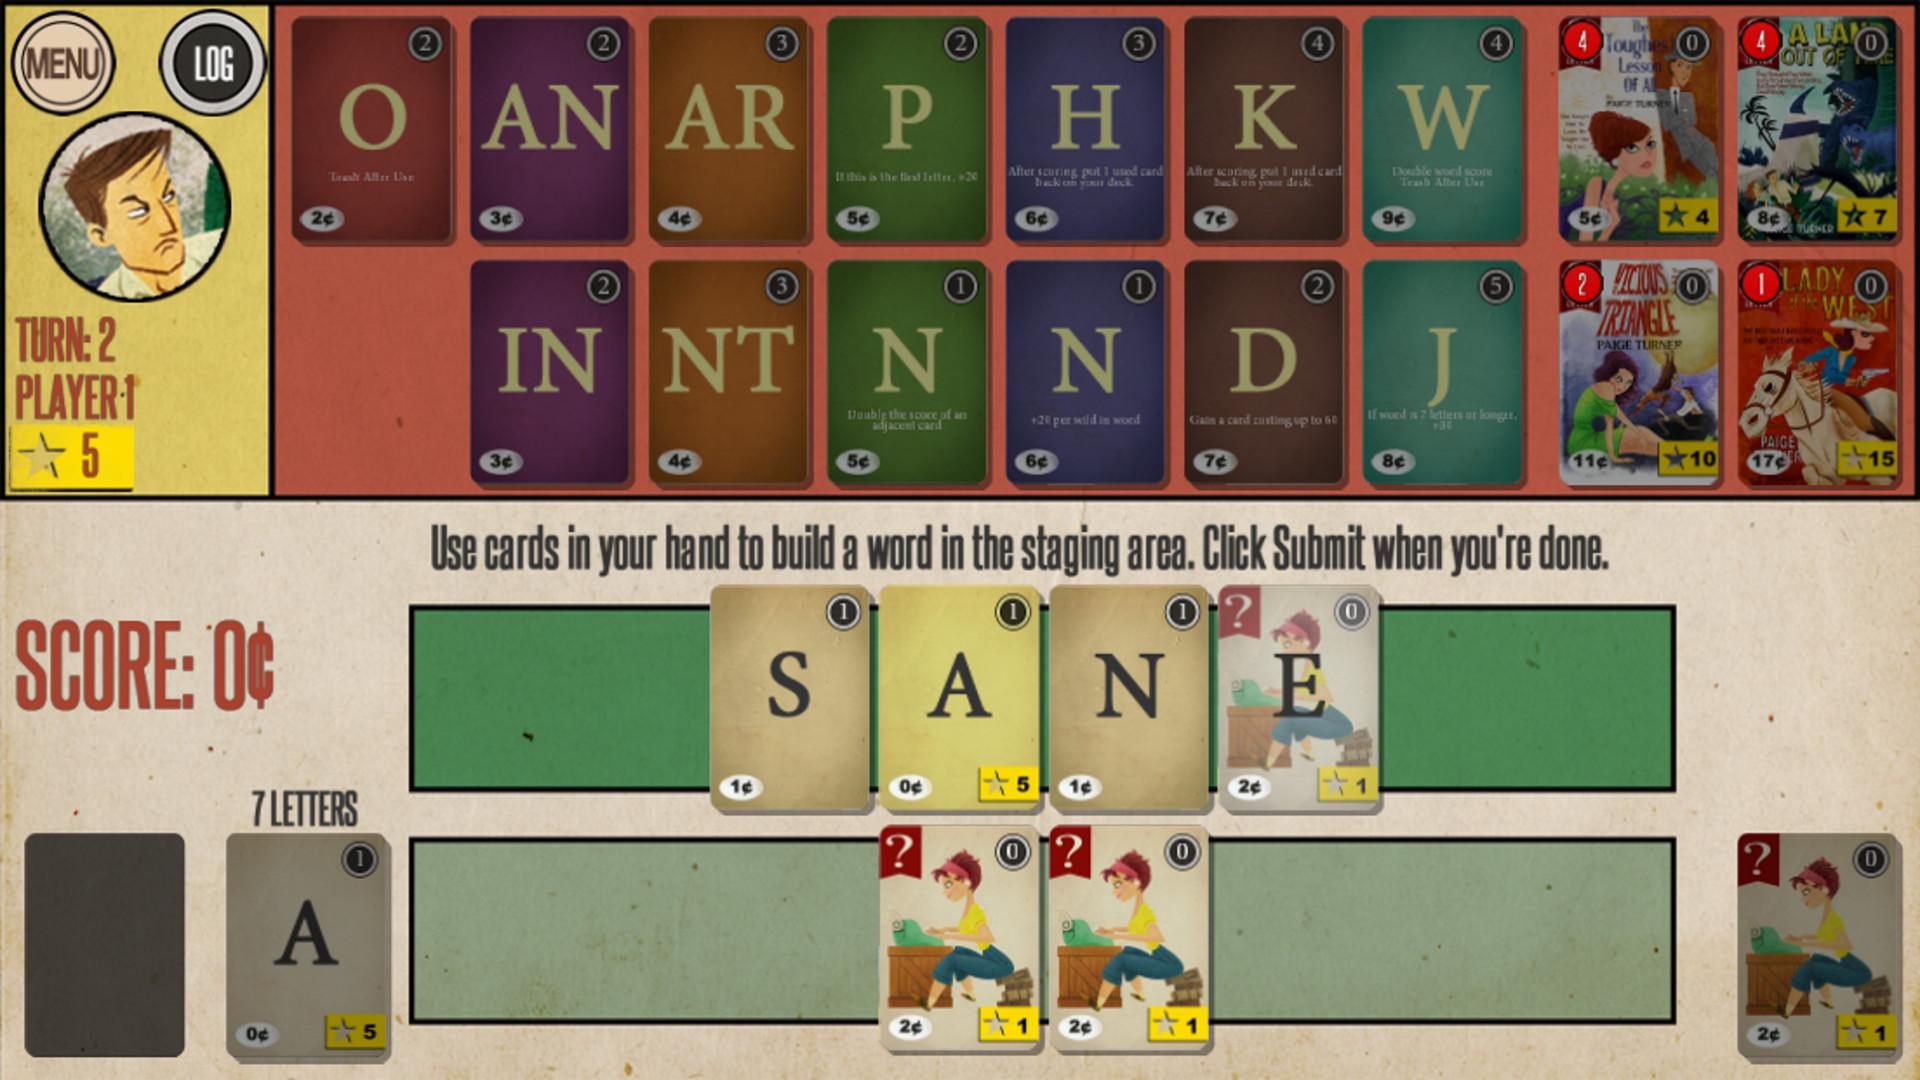 Screenshot №2 from game Paperback: The Game